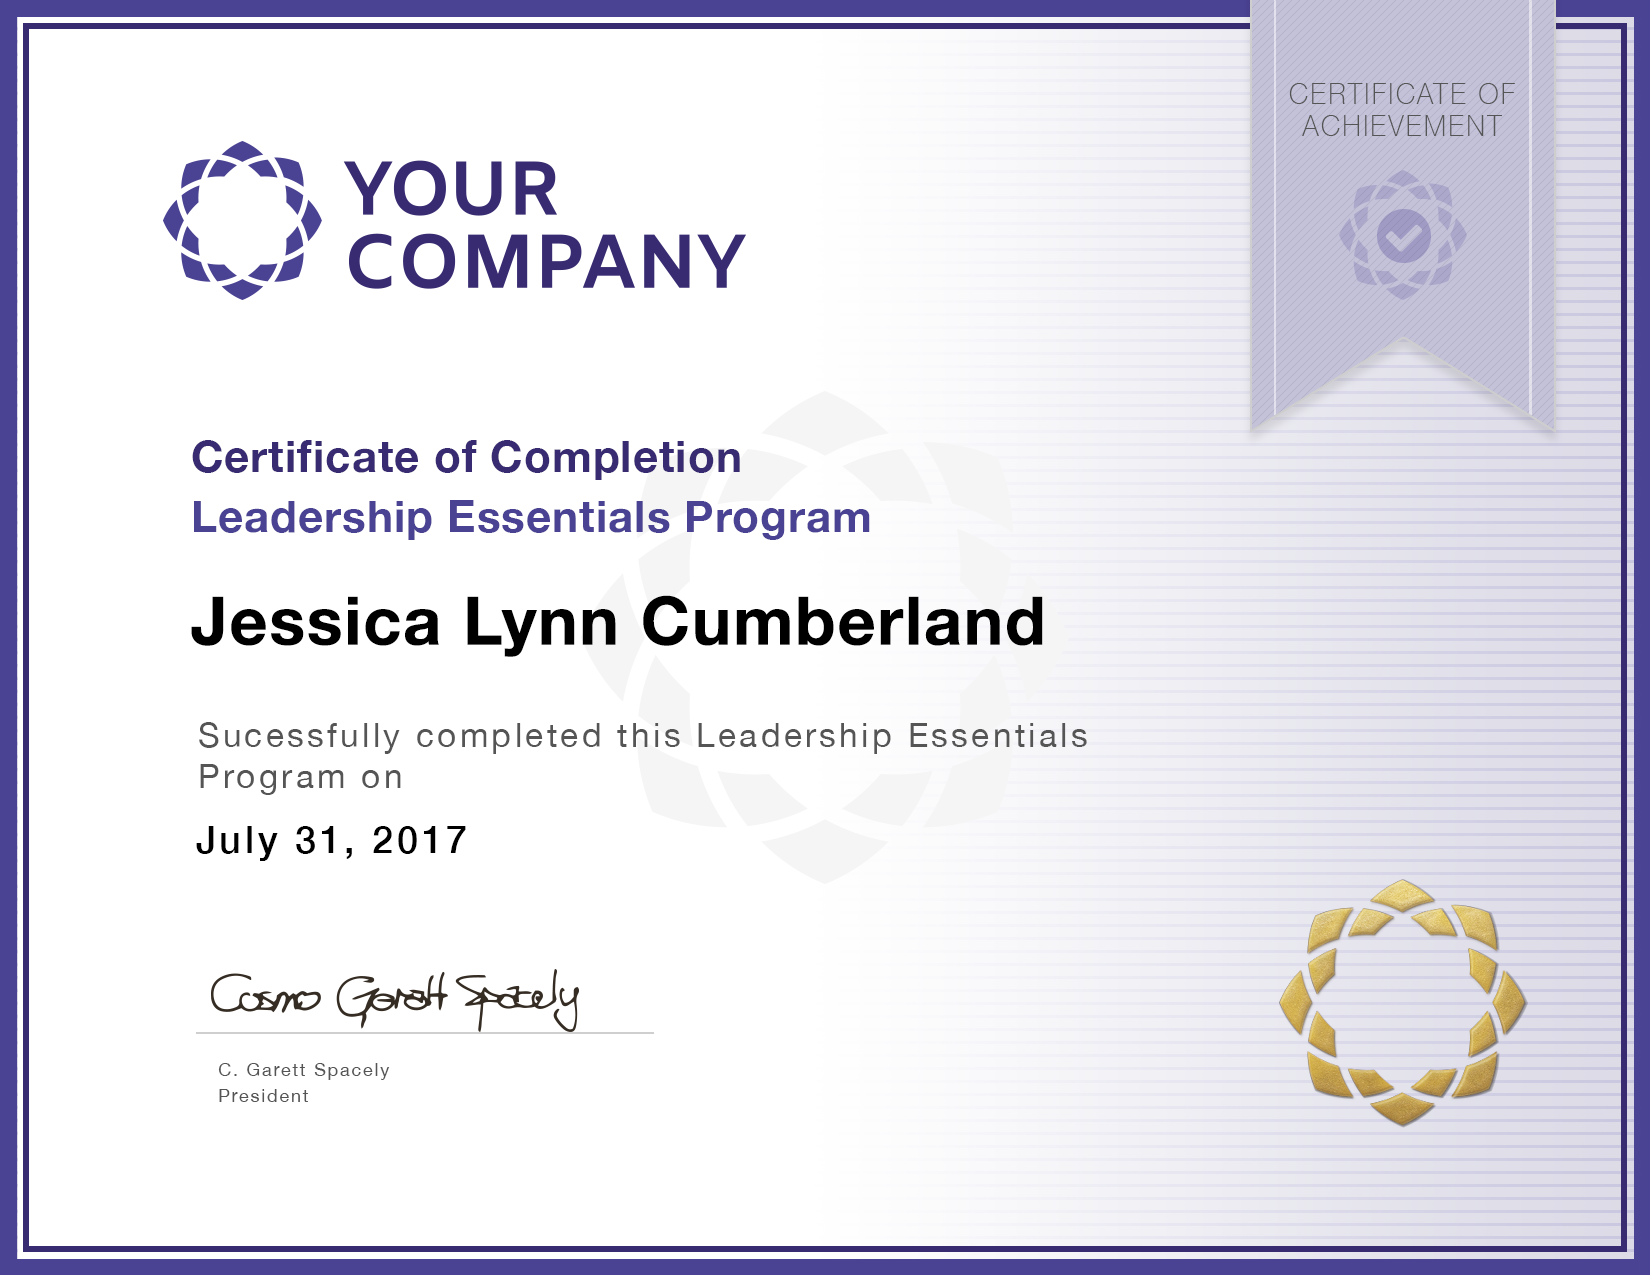 YourCompany_Cert-01.png